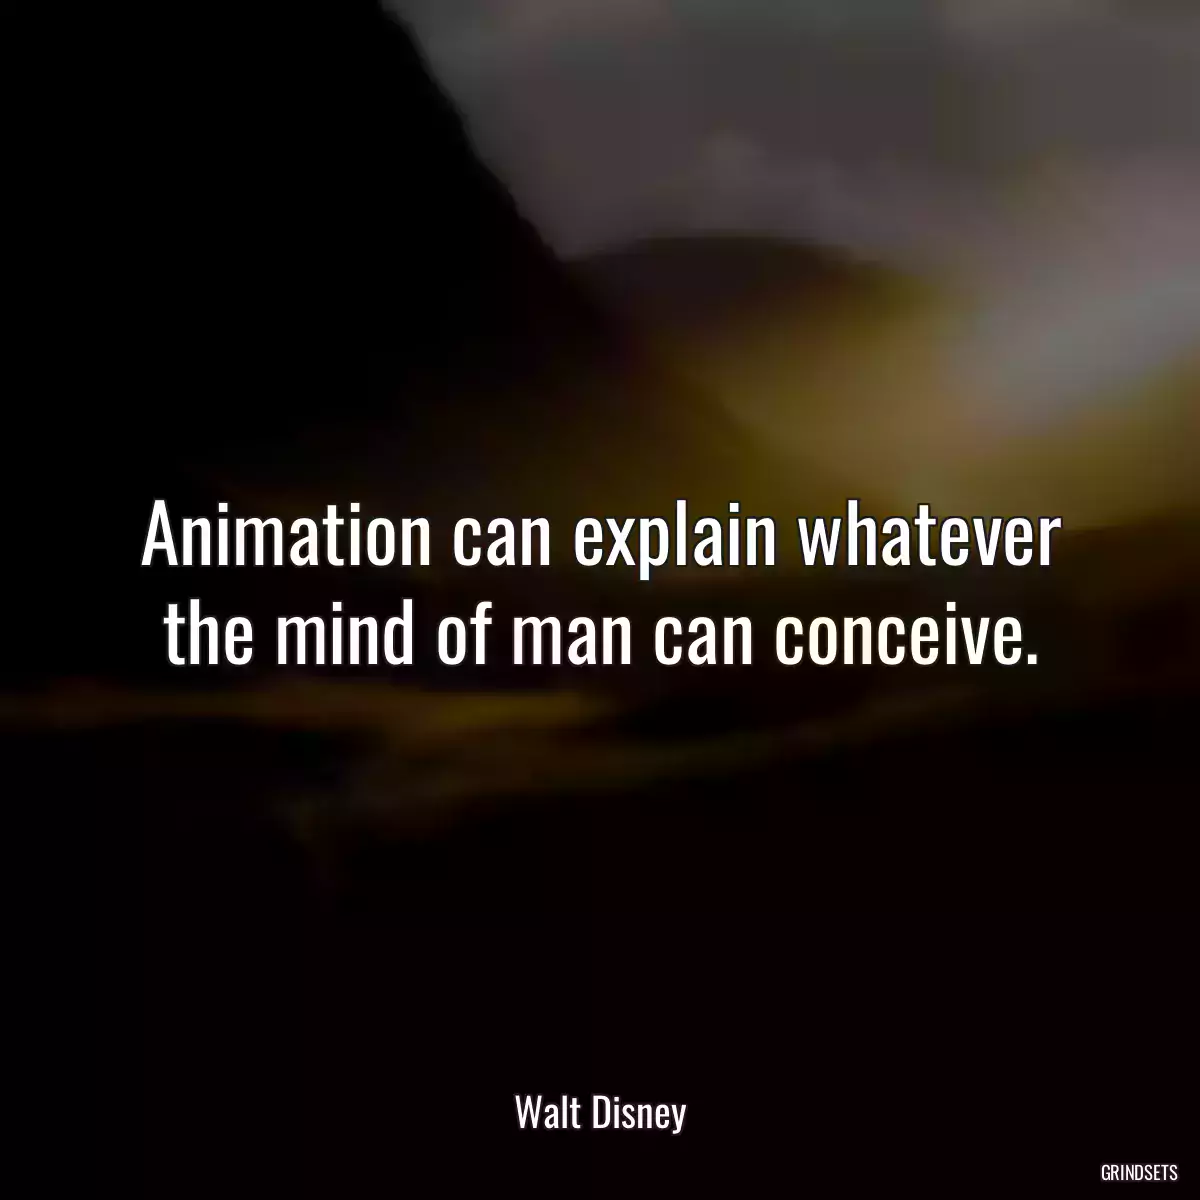 Animation can explain whatever the mind of man can conceive.